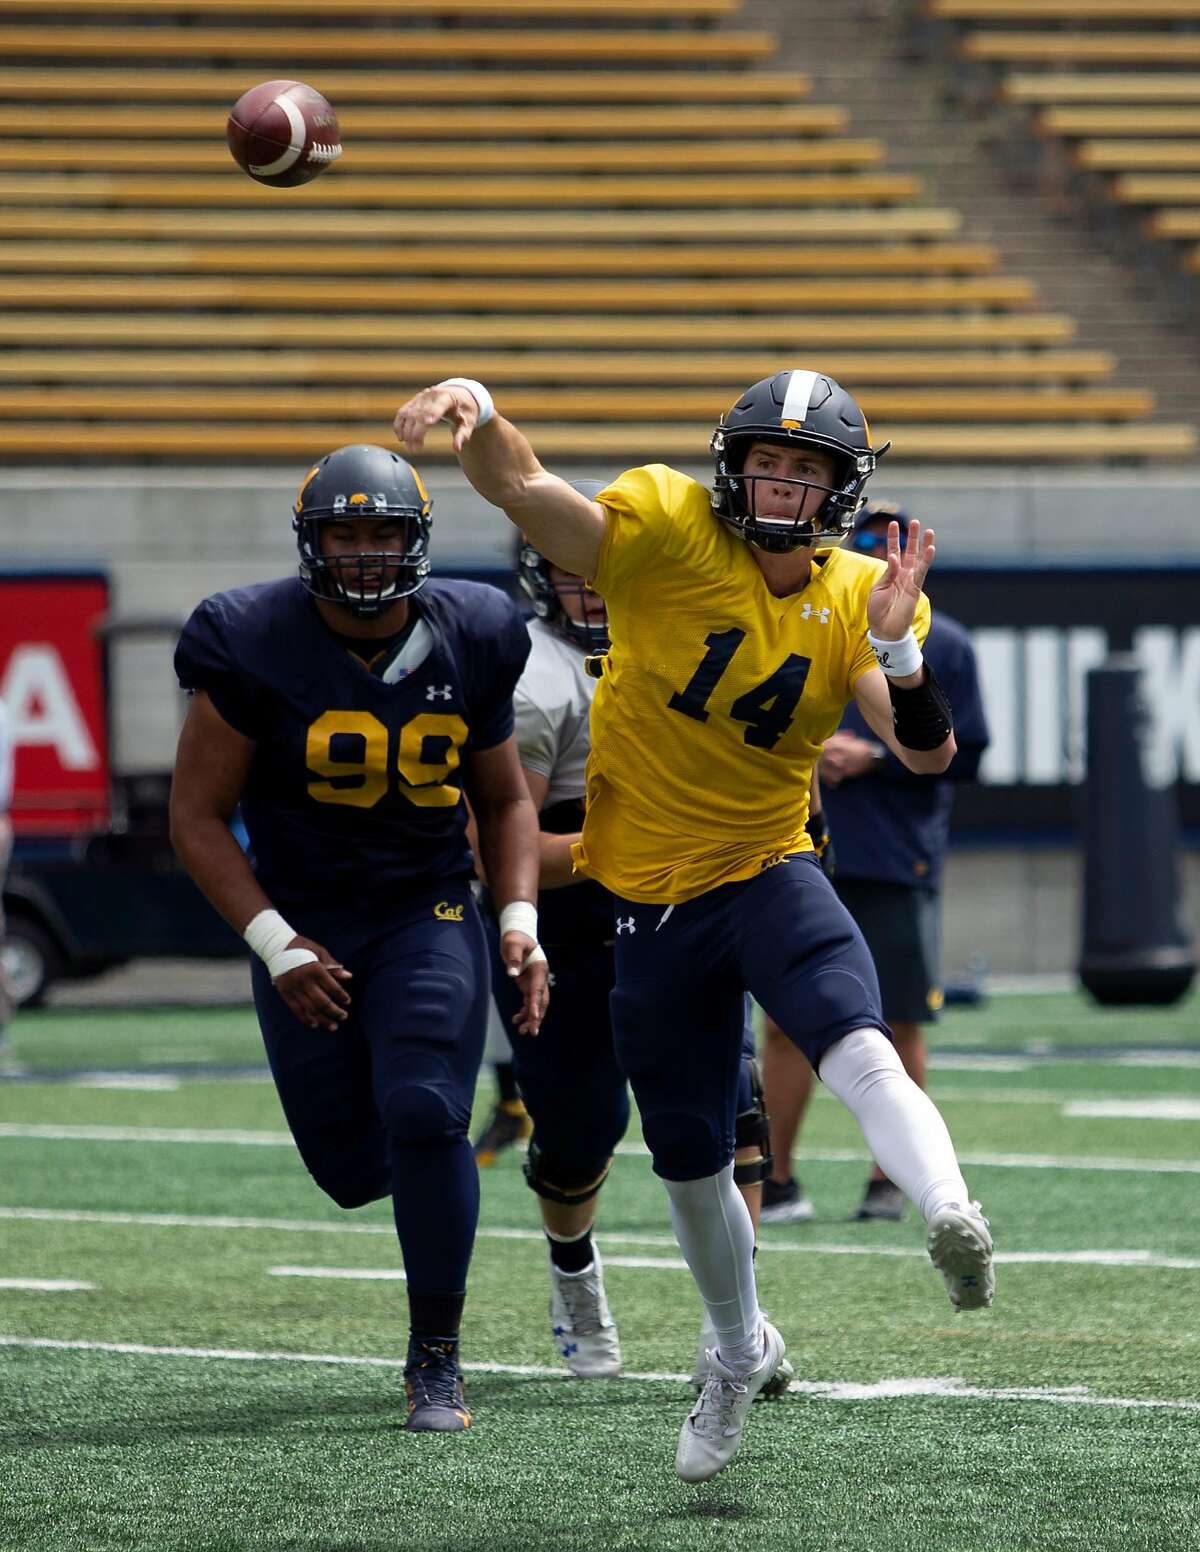 California quarterback Chase Forrest (14) throws on the run during the spring football scrimmage at Memorial Stadium, Saturday, April 28, 2018 in Berkeley, Calif.